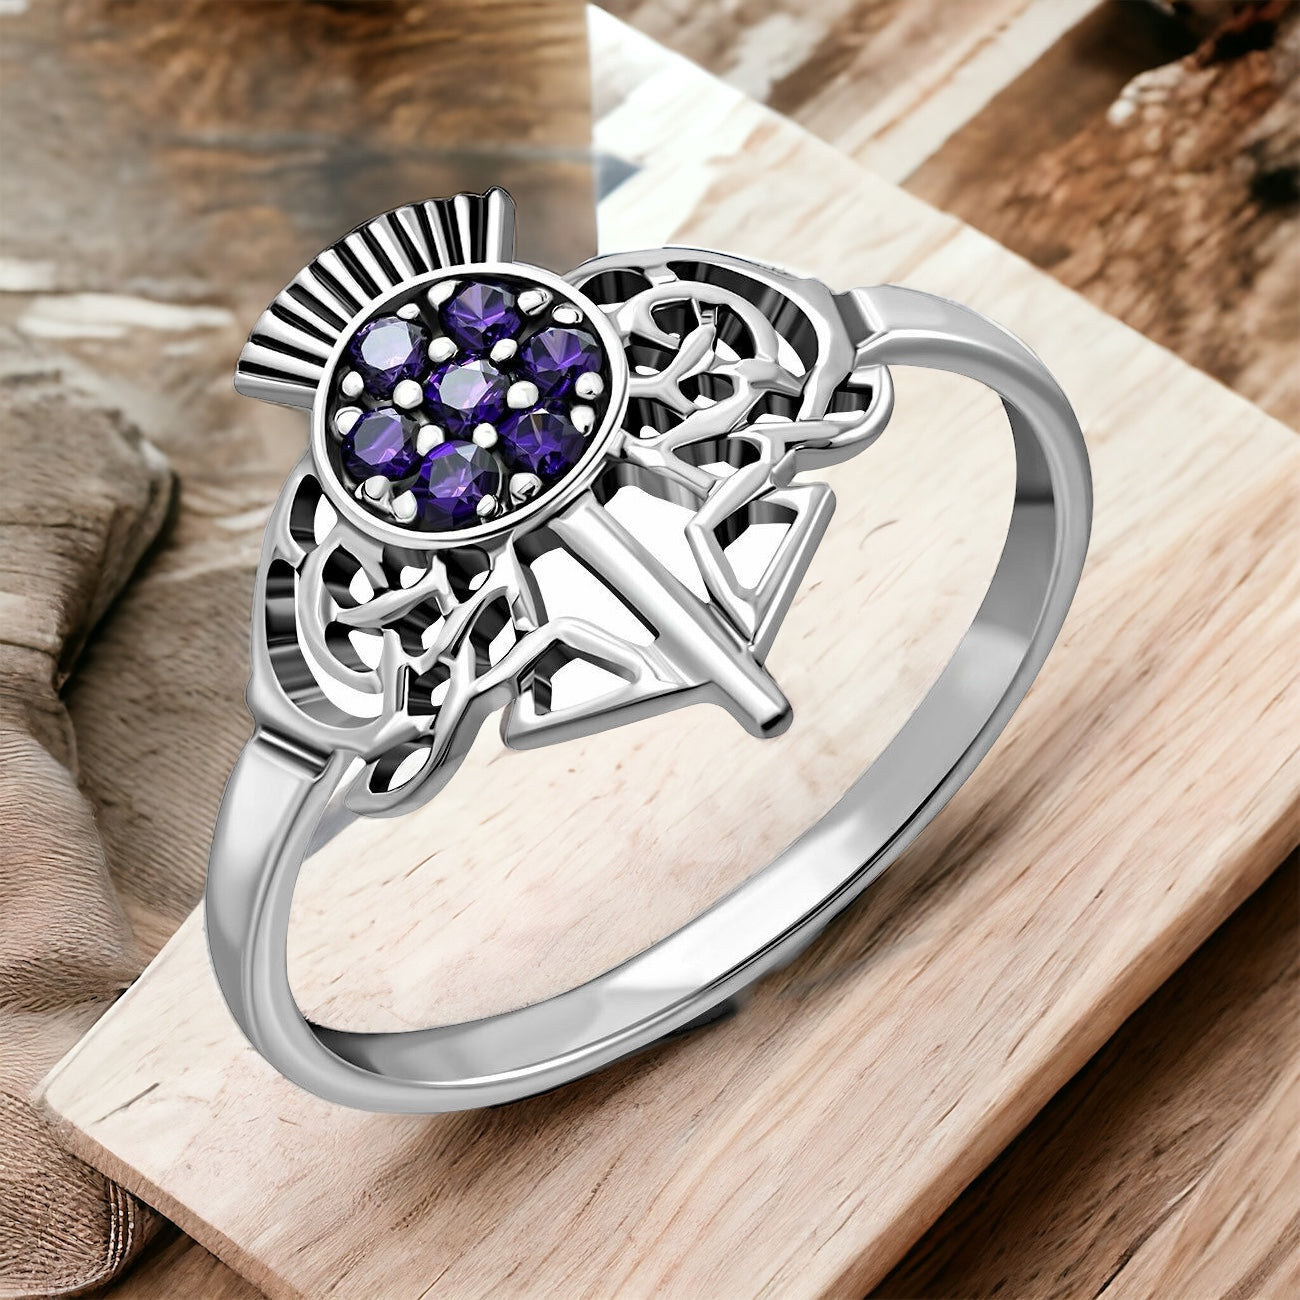 925 Sterling Silver Scottish Thistle Ring with Amethyst CZ